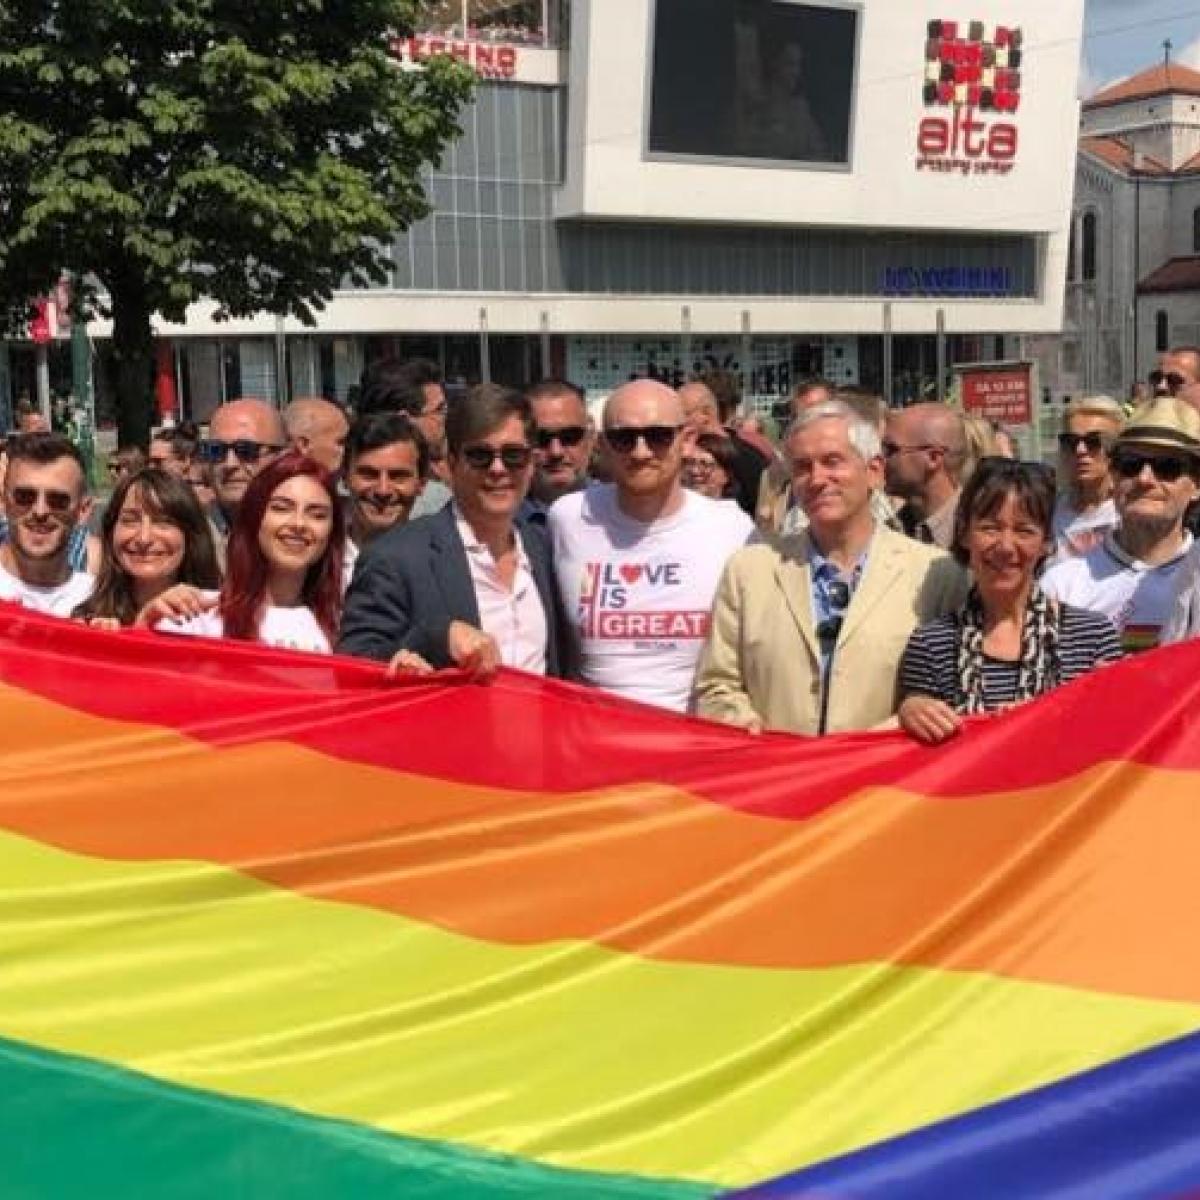 USAID stands at the forefront of the fight for full and equal rights for LGBTI people in Bosnia and Herzegovina.